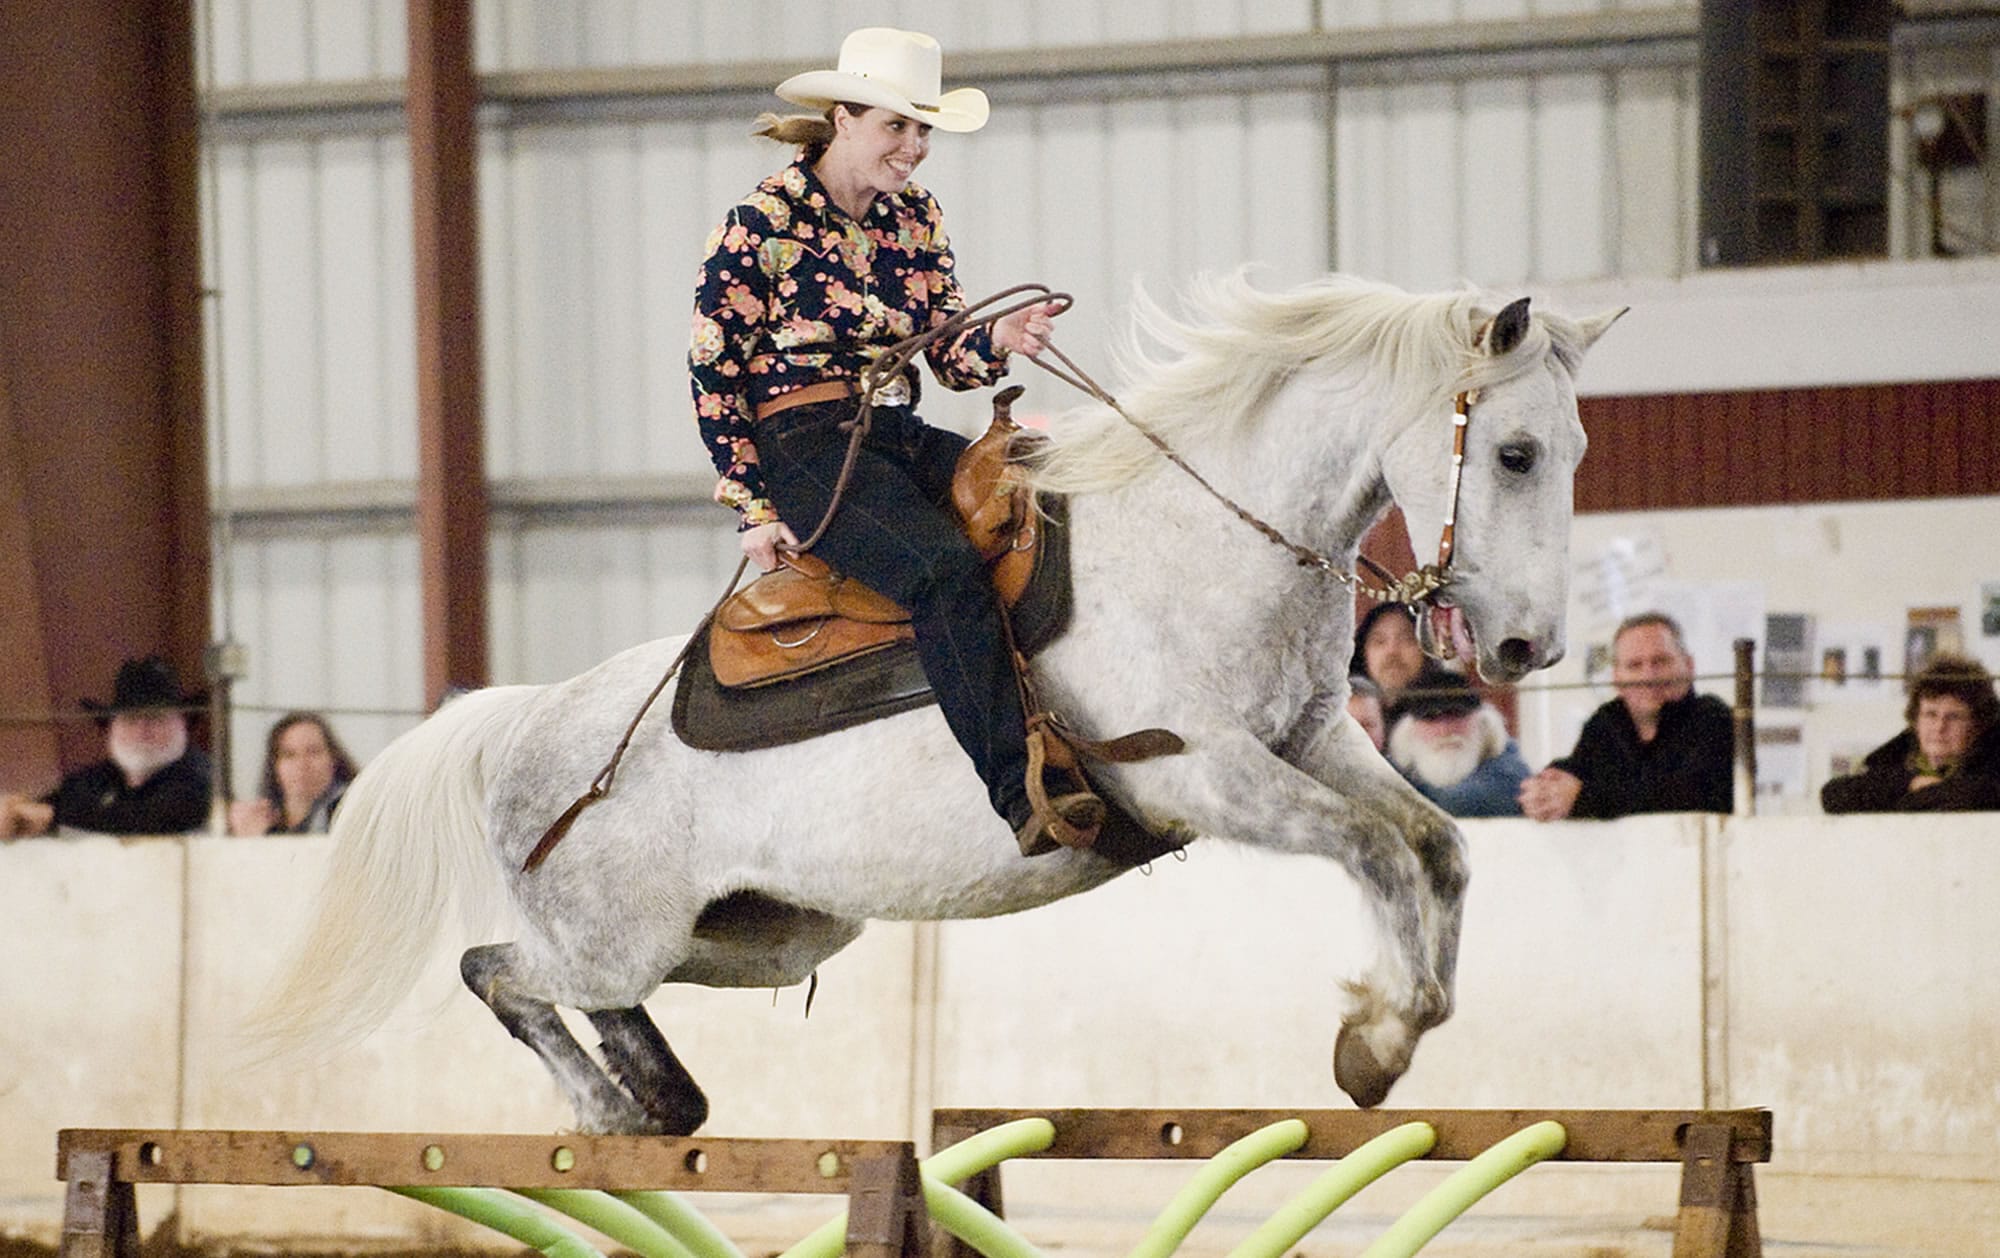 Jessica Bishop, of Scio, Ore., riding Chief Seattle, competes in the Craig Cameron Extreme Cowboy Race at the Washington State Horse Expo, held at the Clark County Event Centeron Feb.